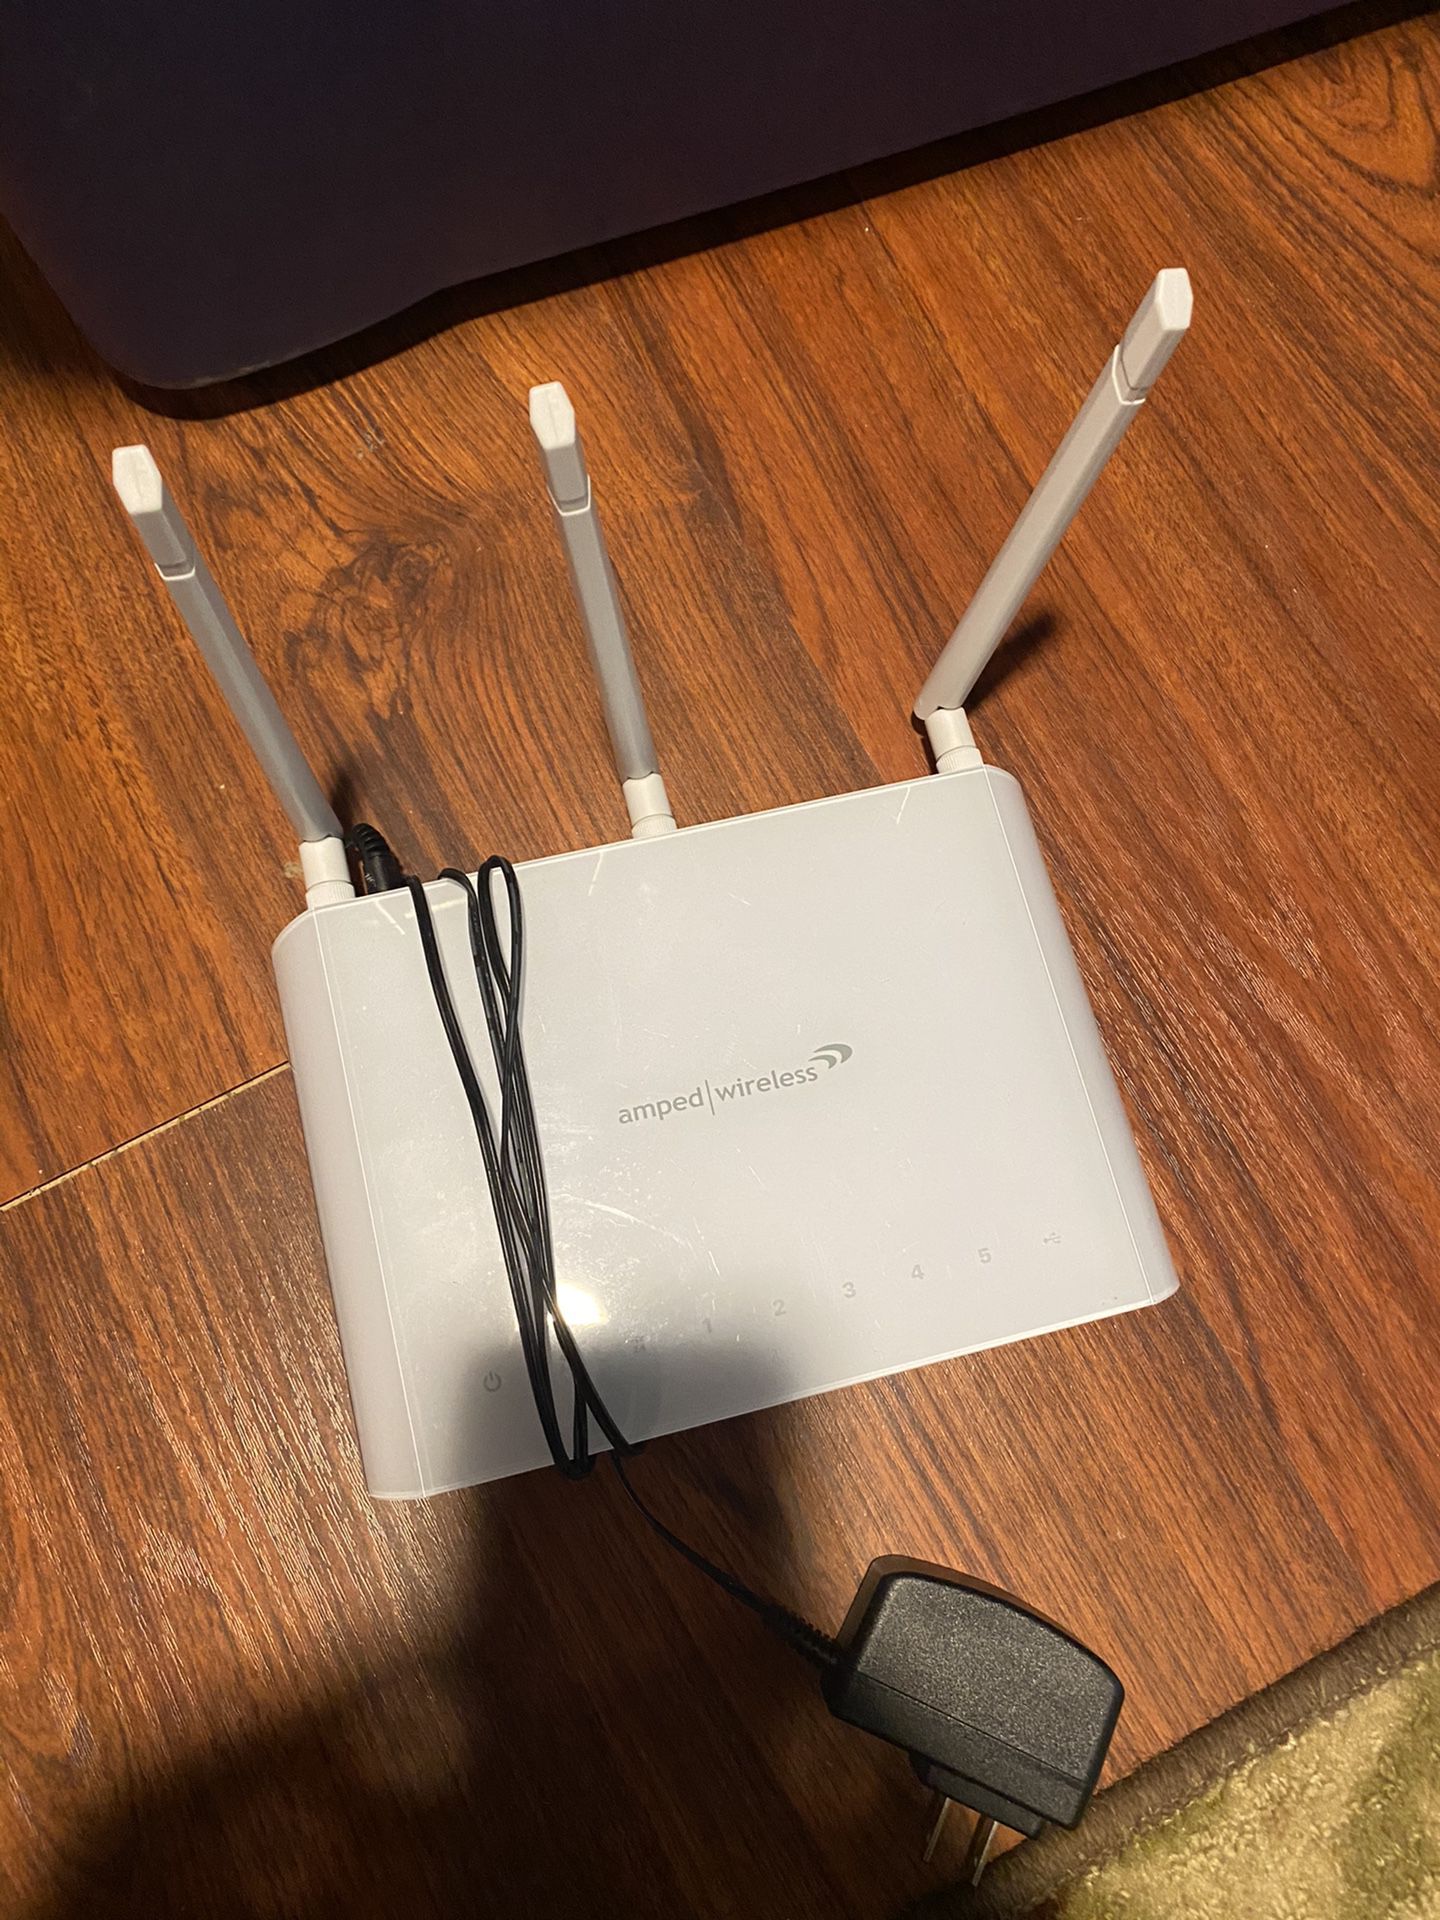 Internet router with powerful wifi extender.